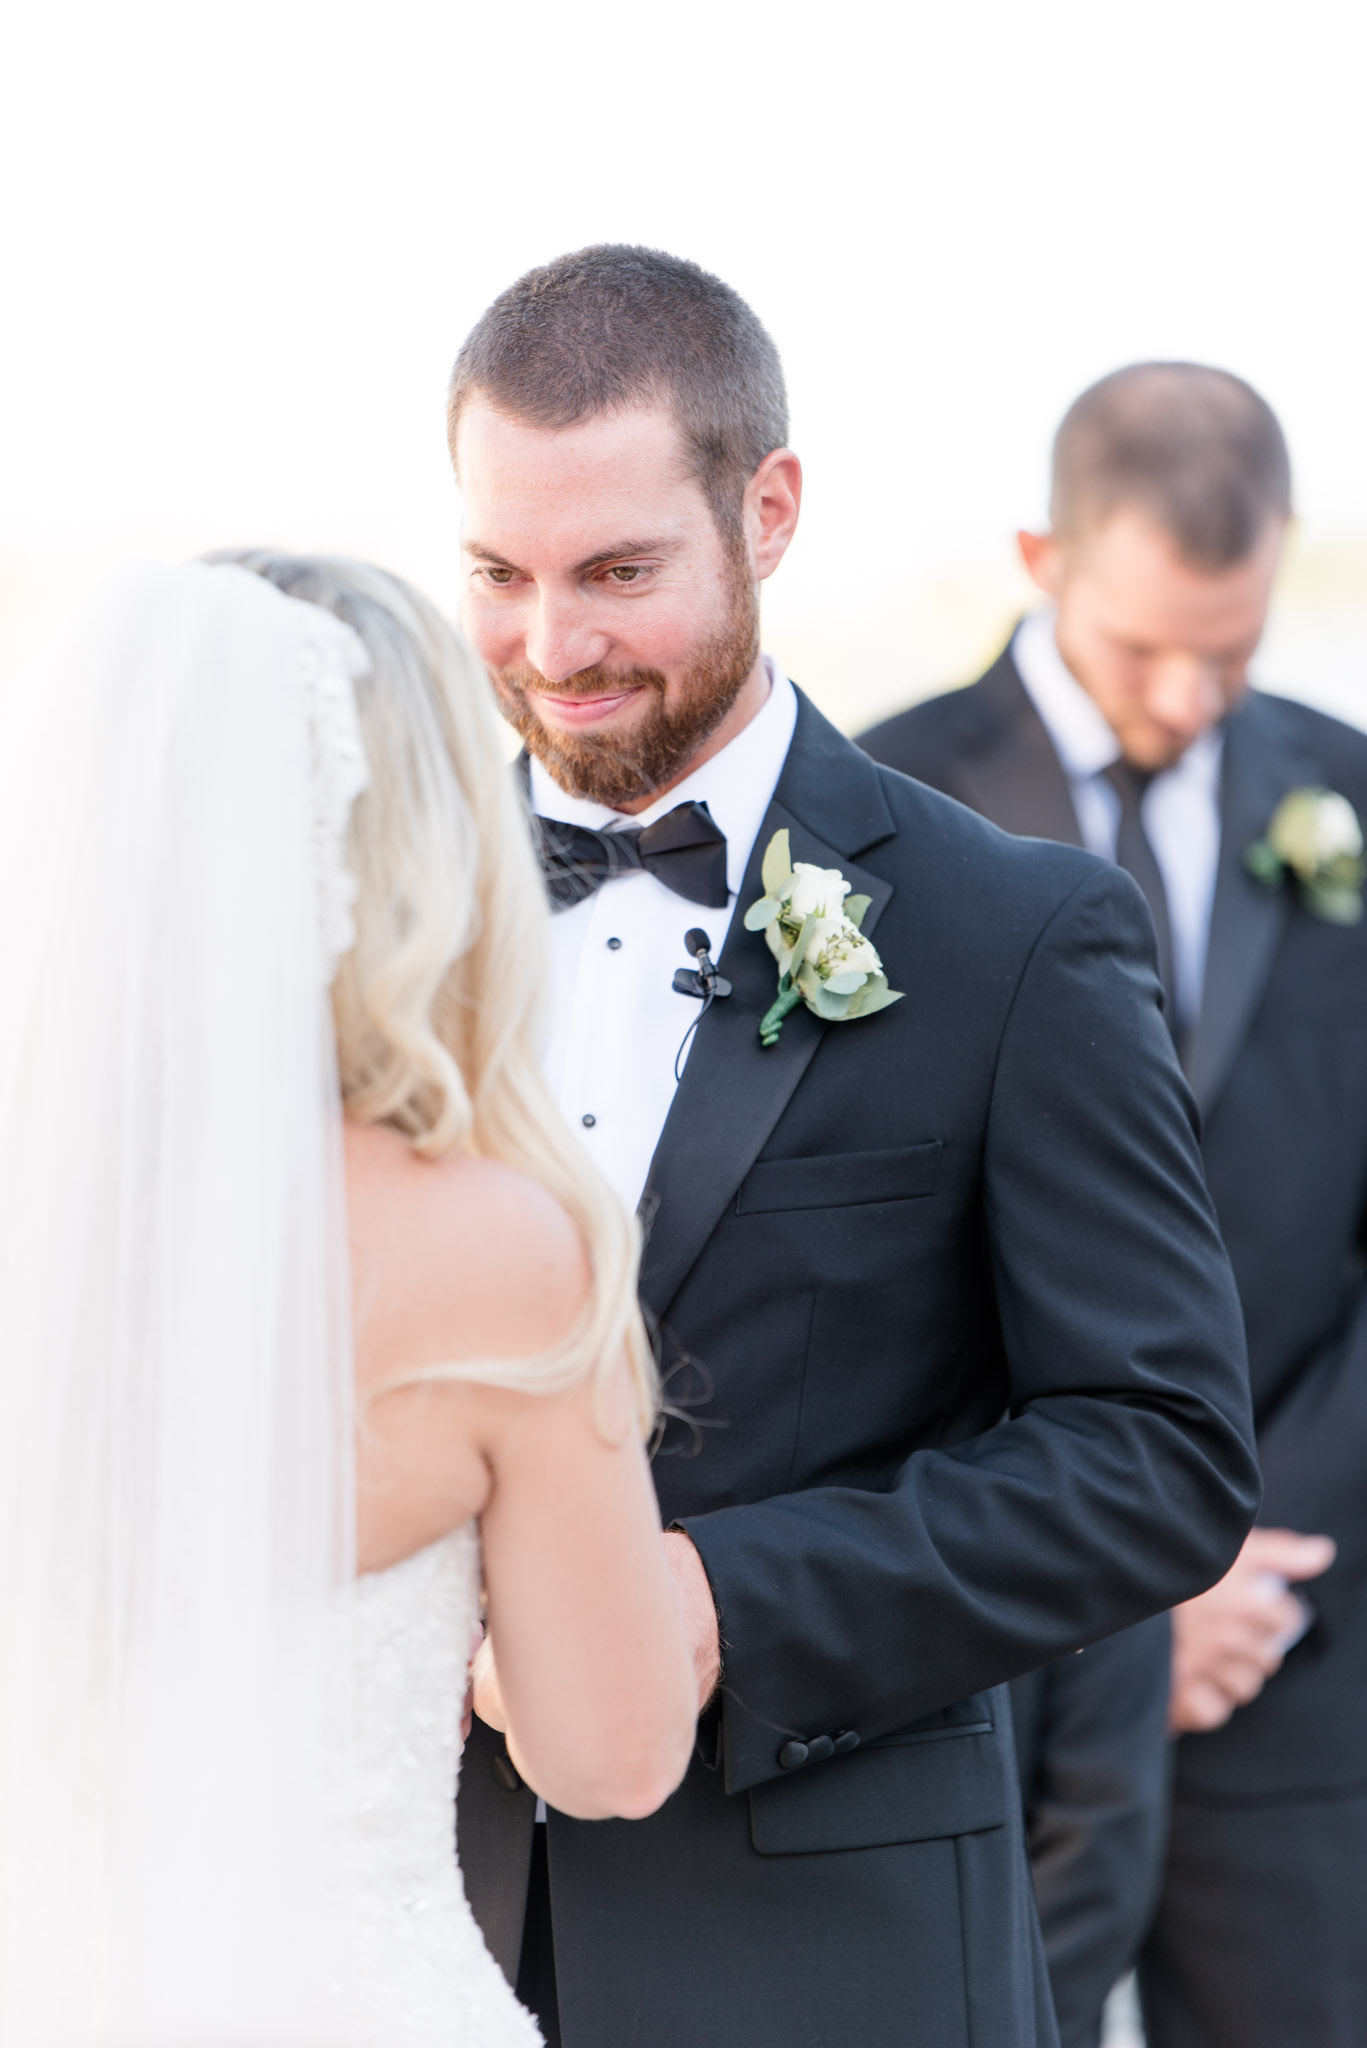 Groom smiles at bride during wedding ceremony.